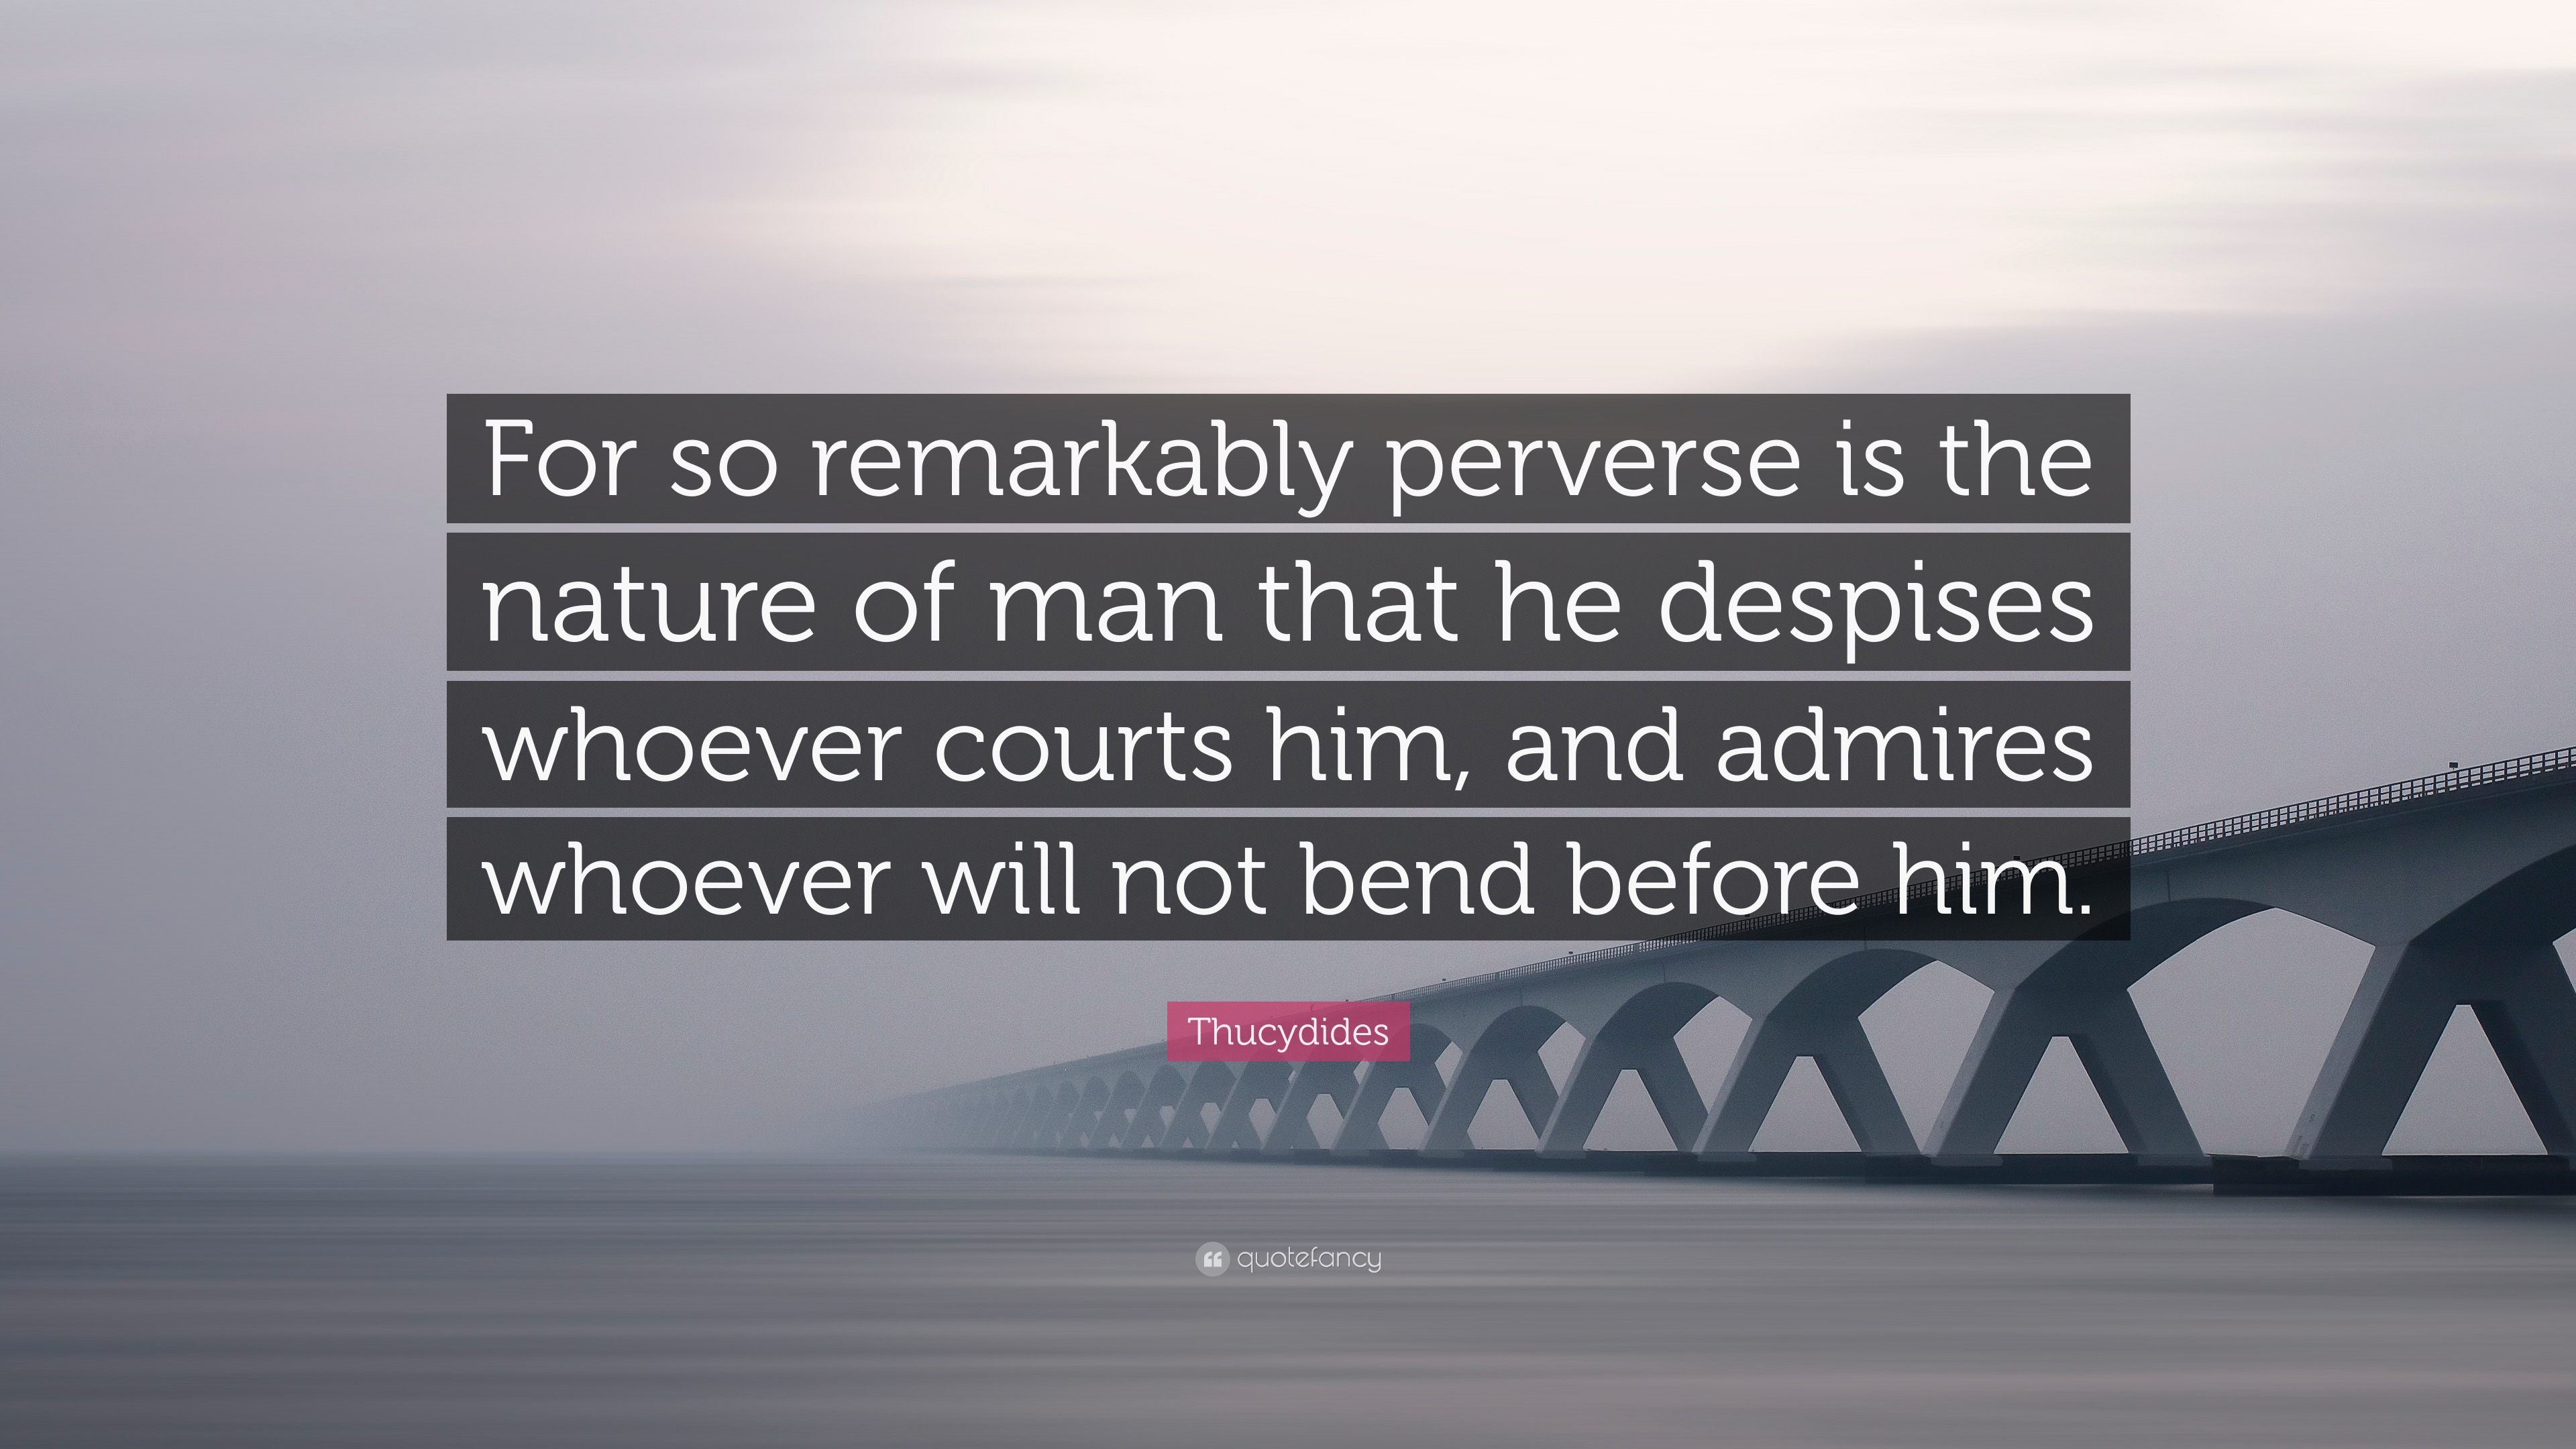 Overgivelse Grunde kredit Thucydides Quote: “For so remarkably perverse is the nature of man that he  despises whoever courts him, and admires whoever will not bend b...”